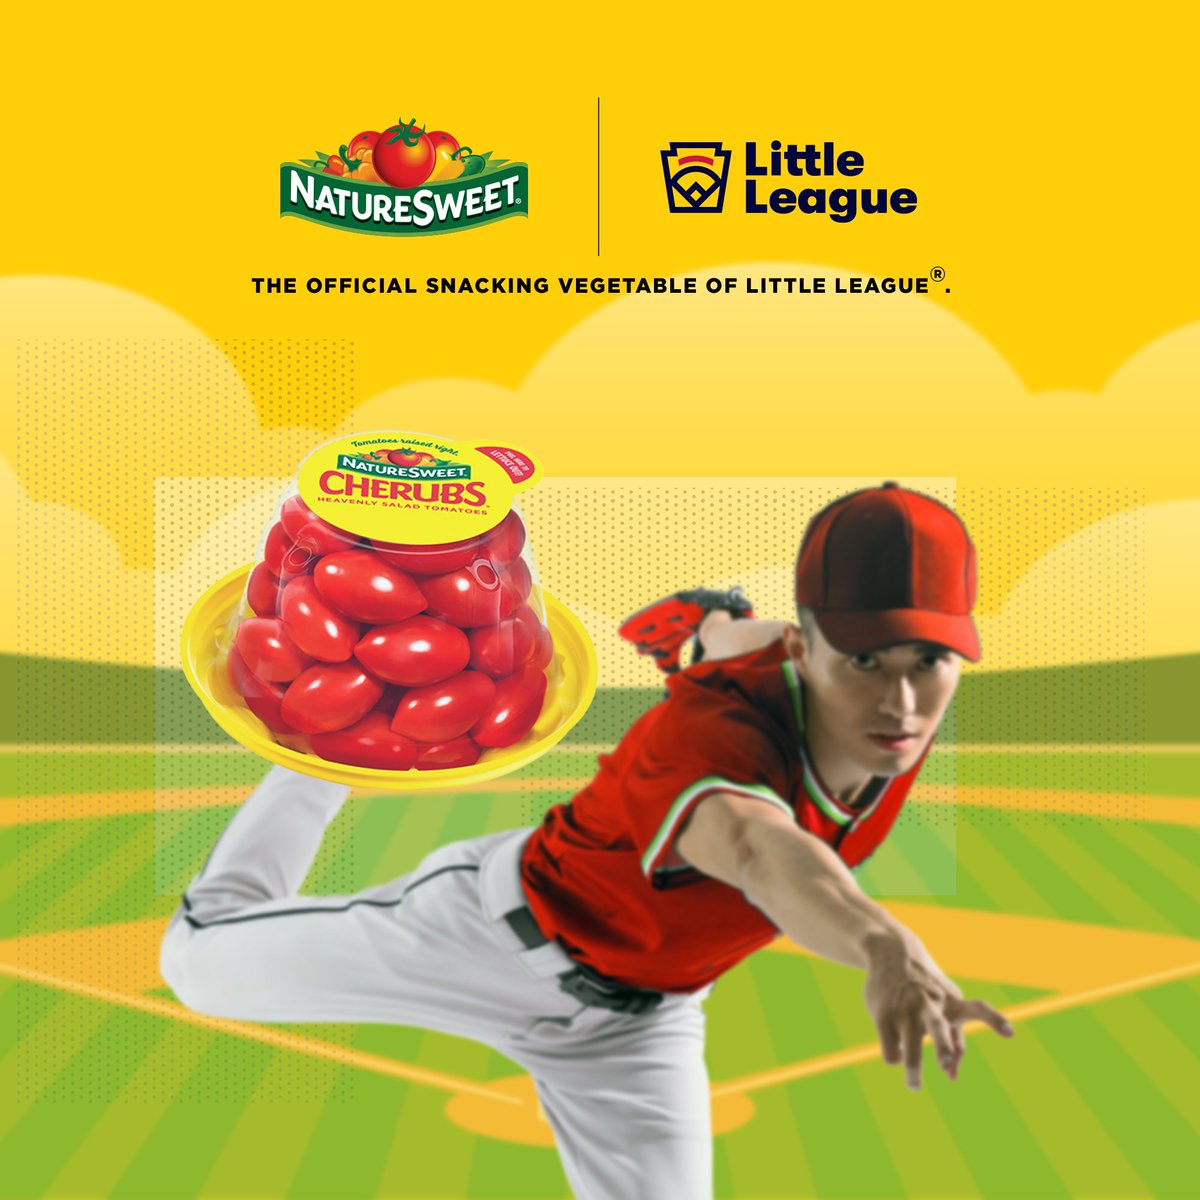 Introducing your designated hitter. NatureSweet is proud to be the Official Snacking Vegetable of @LittleLeague. Our fresh produce is the perfect addition to the iconic baseball snacks we all know and love. ⚾🍅 #NatureSweet #DugoutDelights #LittleLeague #Baseball #Softball